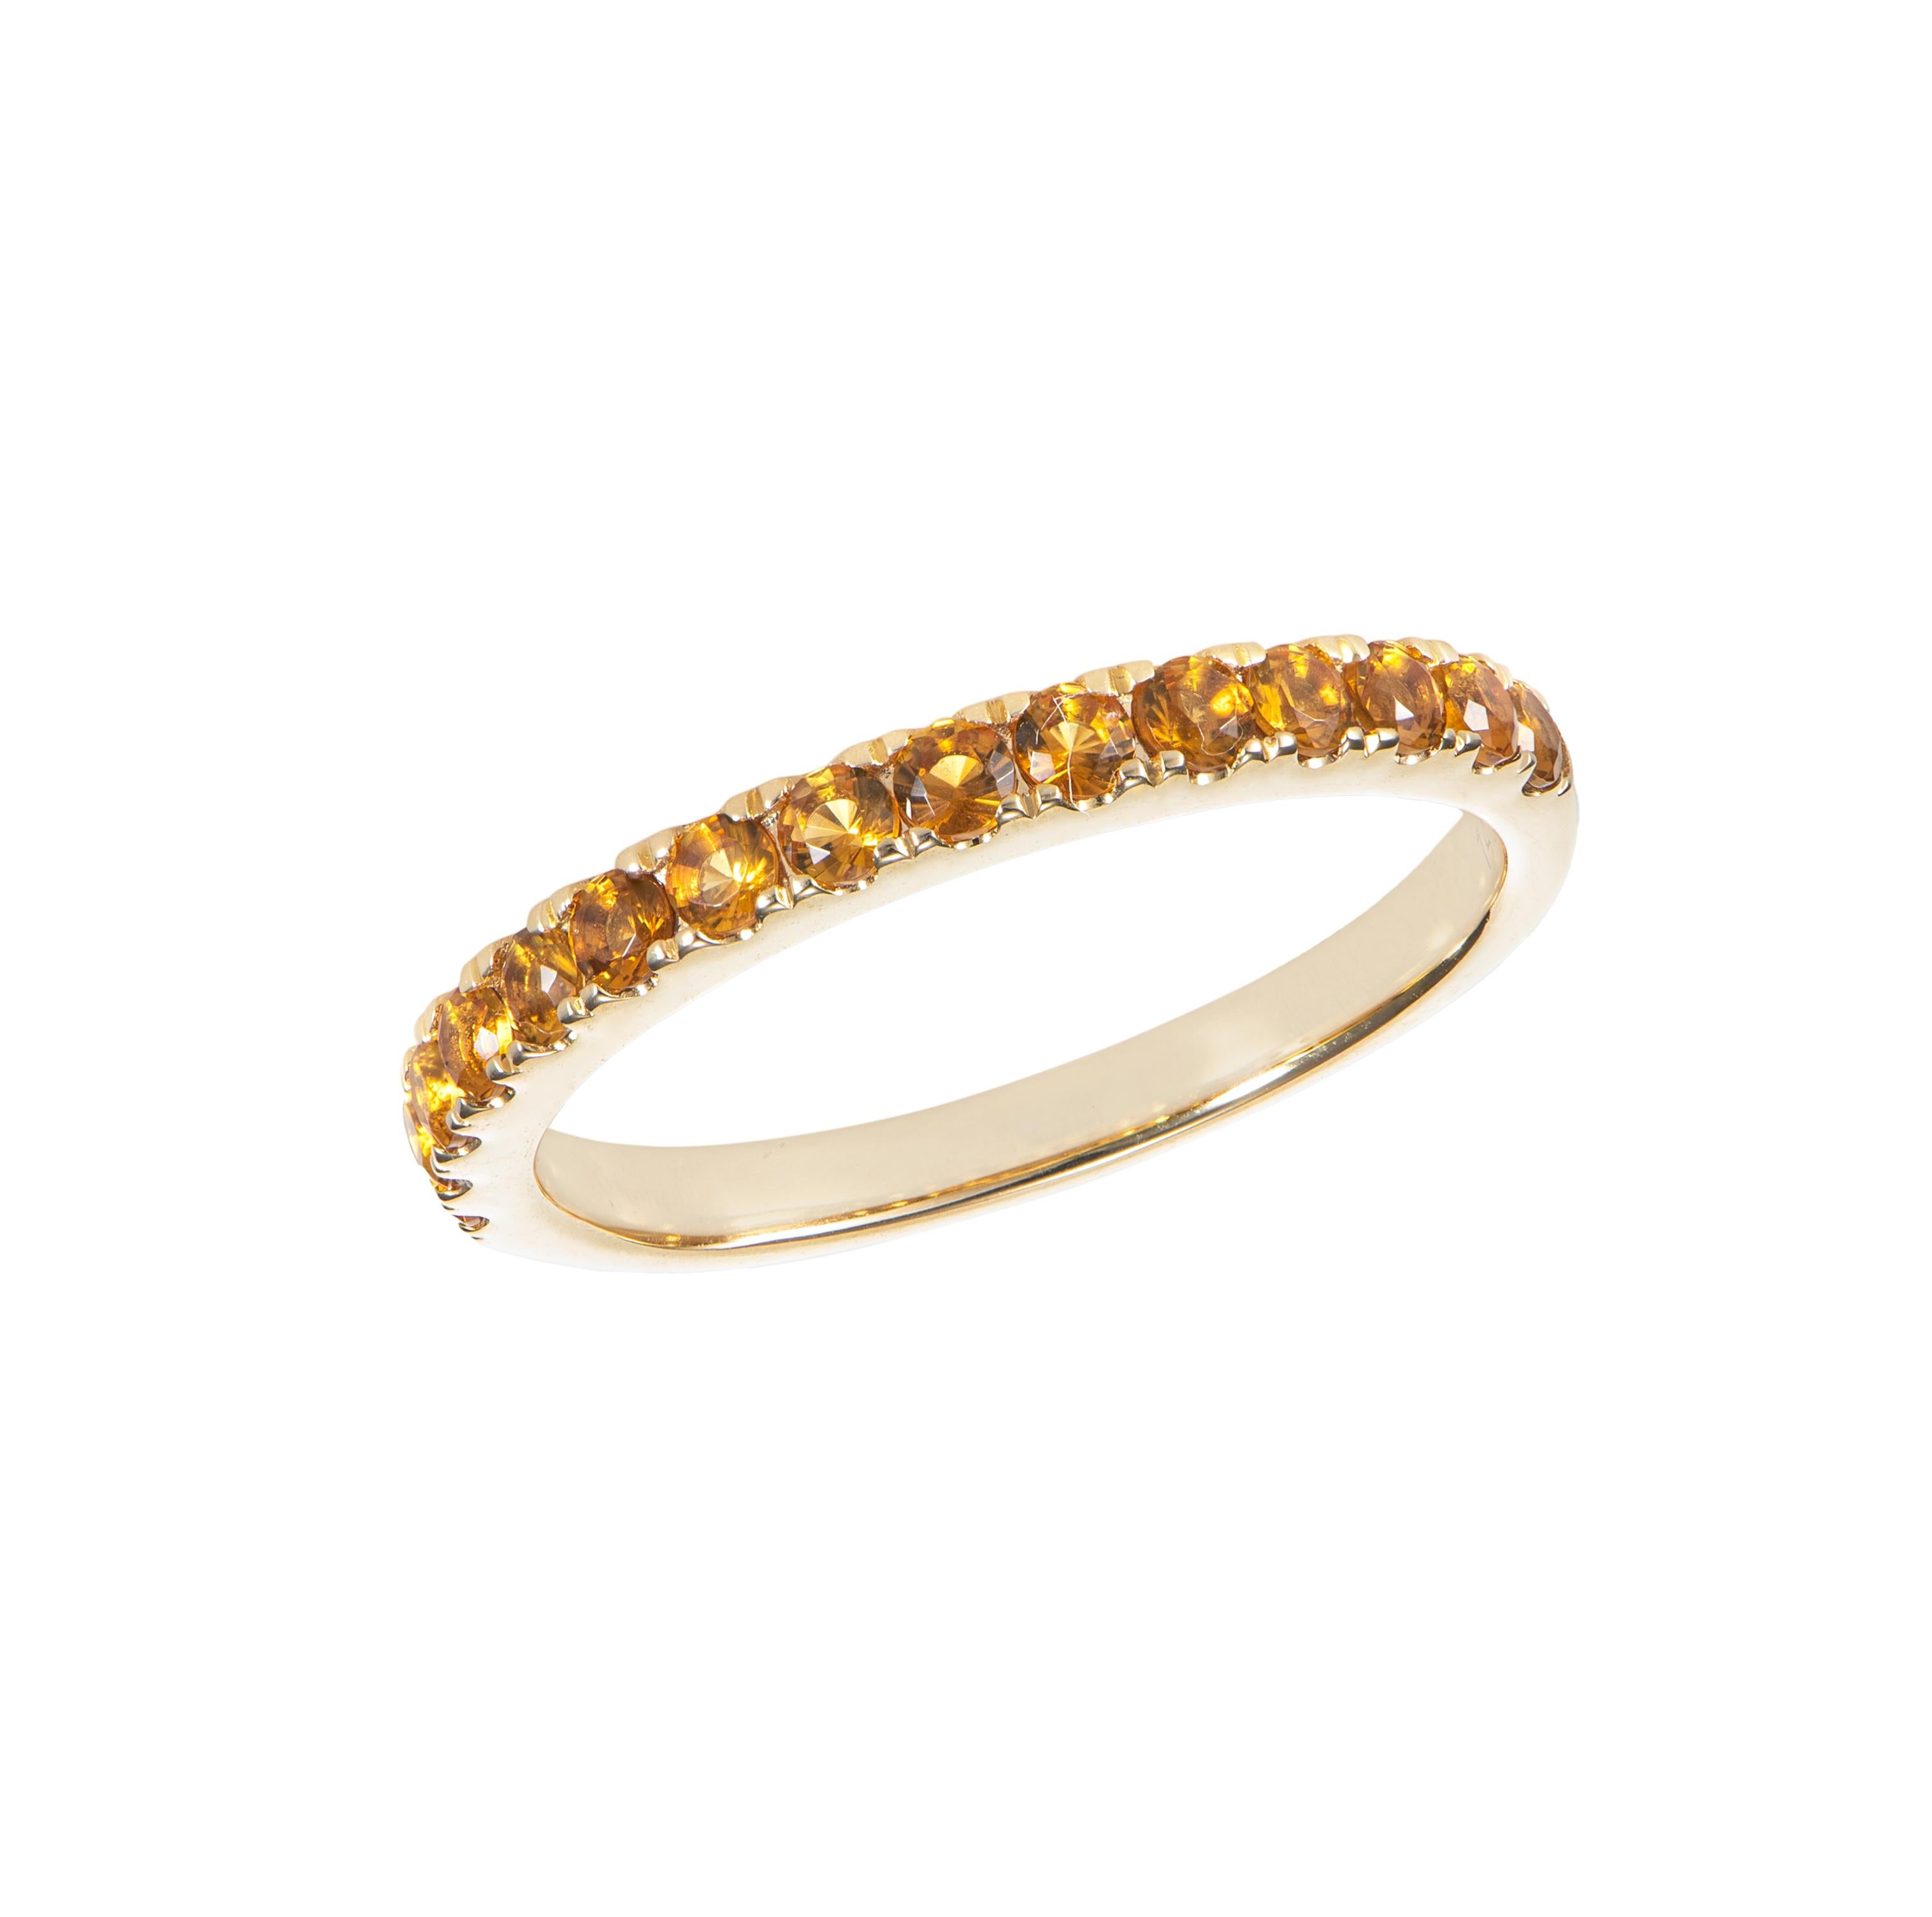 Contemporary 0.455 Carat Citrine Eternity Ring in 14Karat Yellow Gold. For Sale